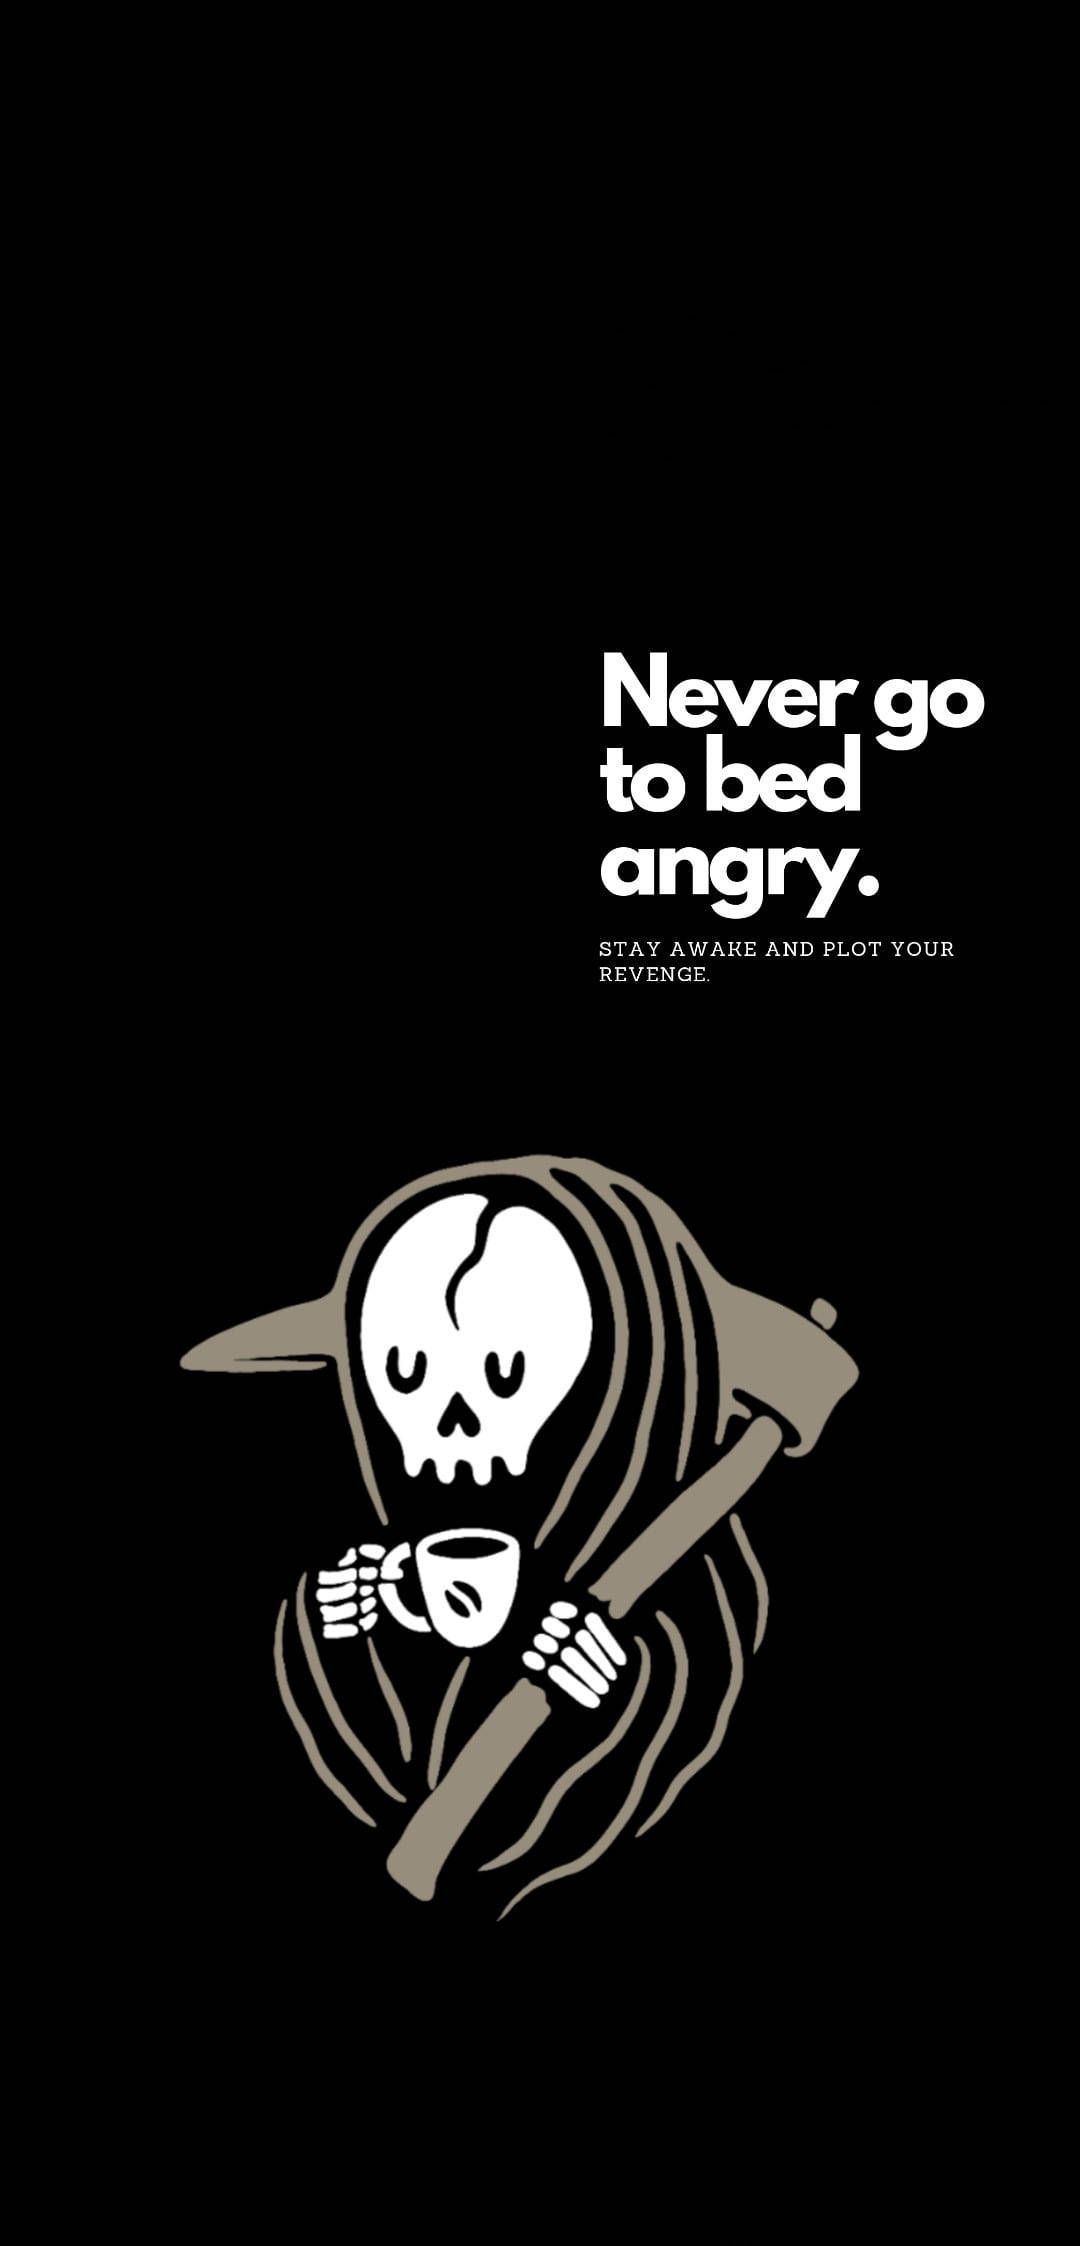 Never go to bed angry - Skeleton